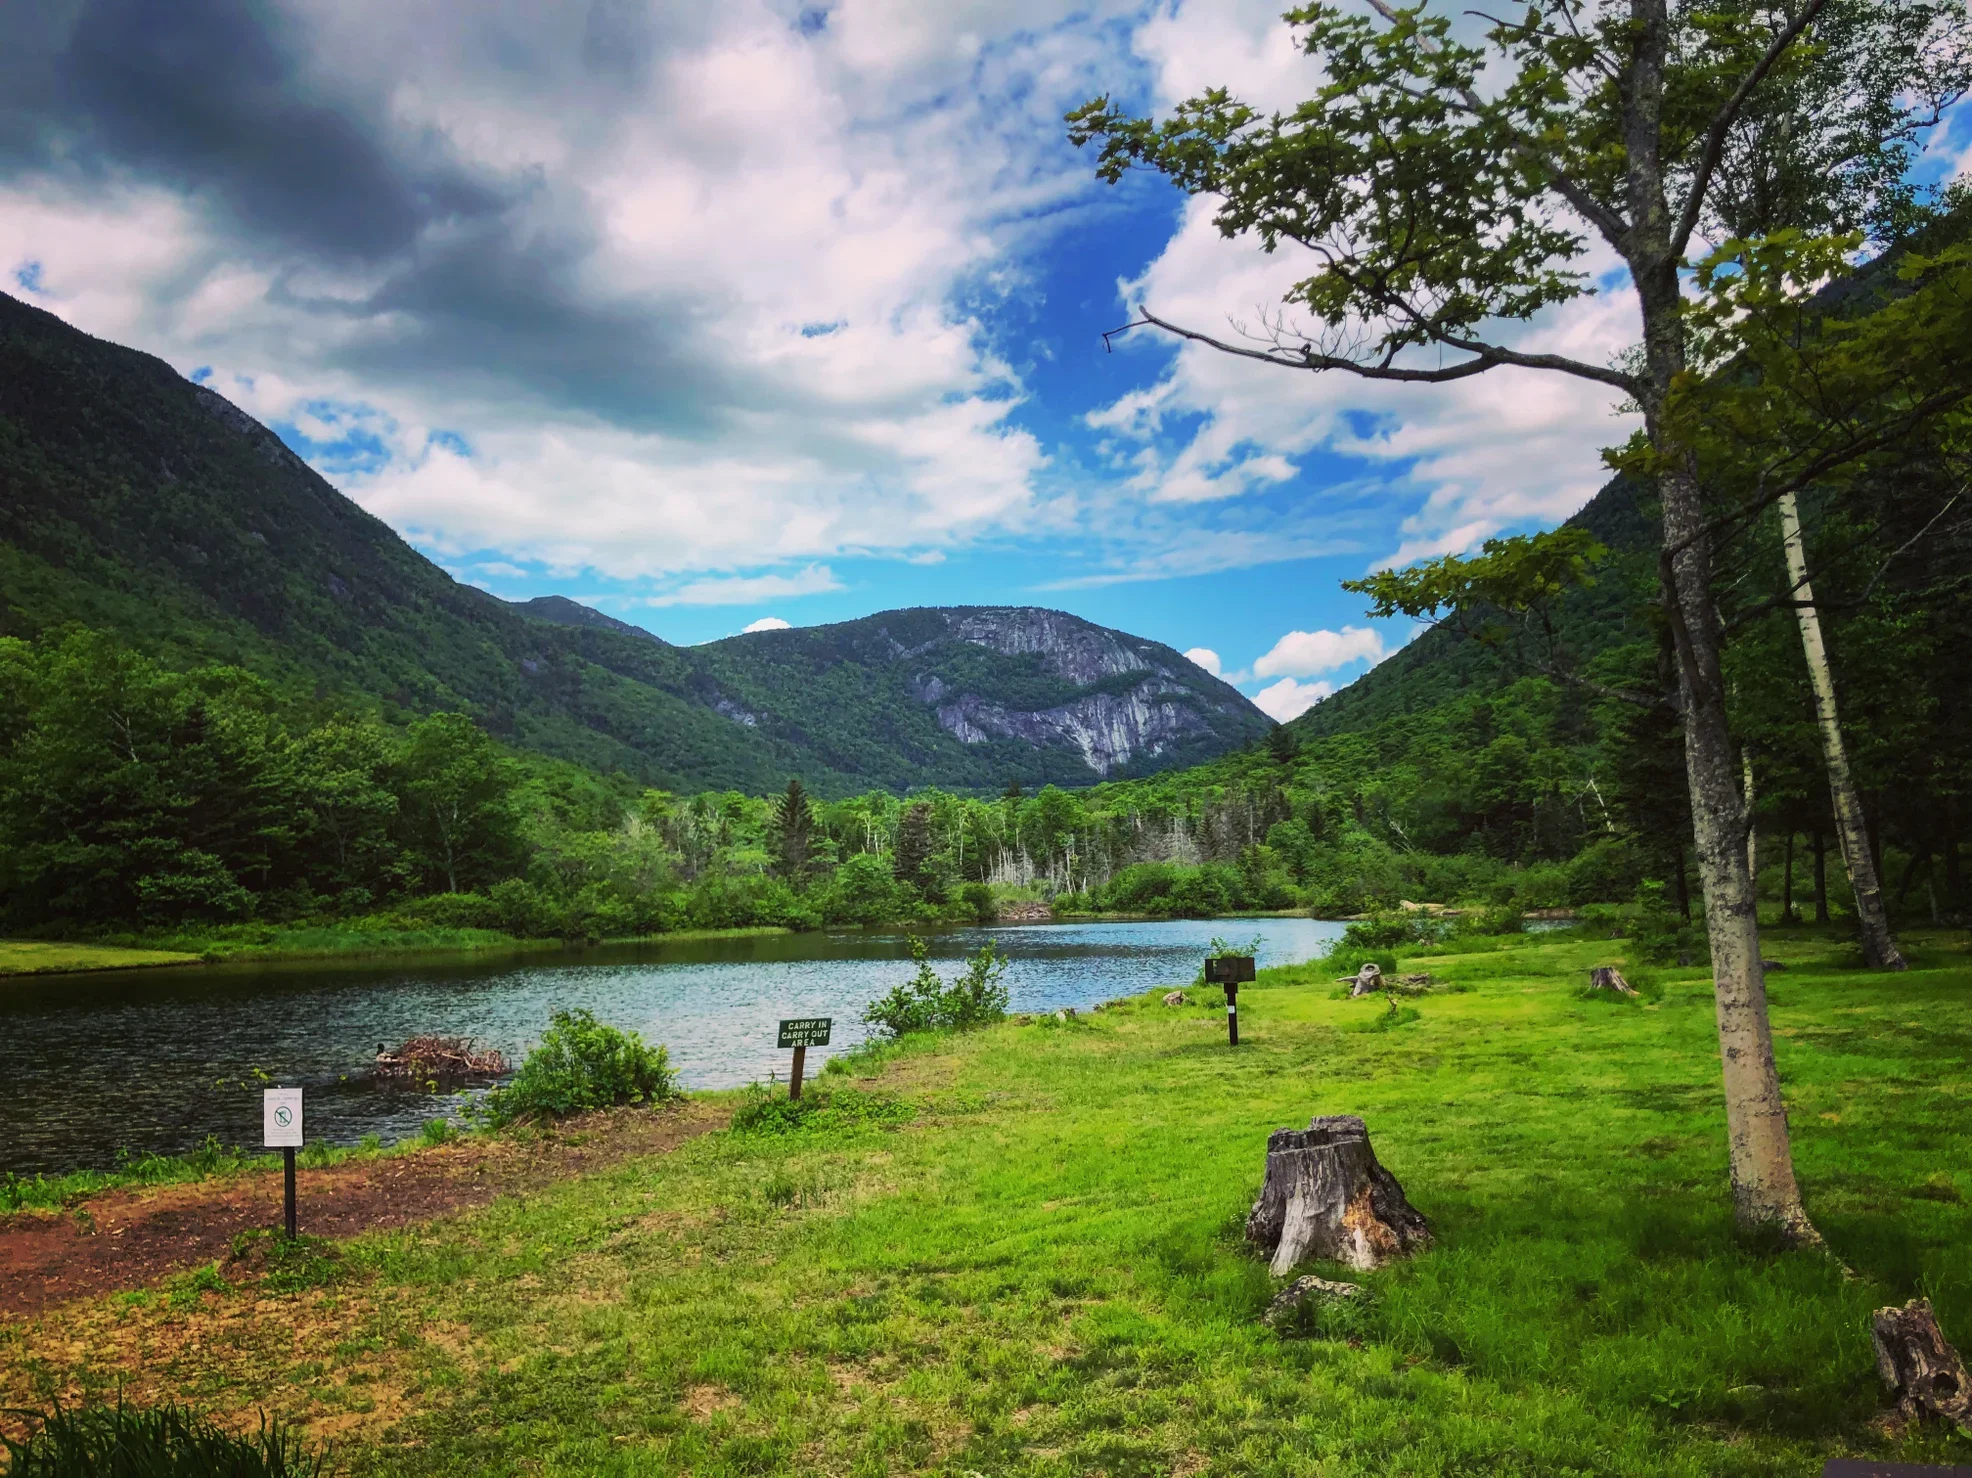 Crawford Notch with rocky white mountains in the distance and a pond below.